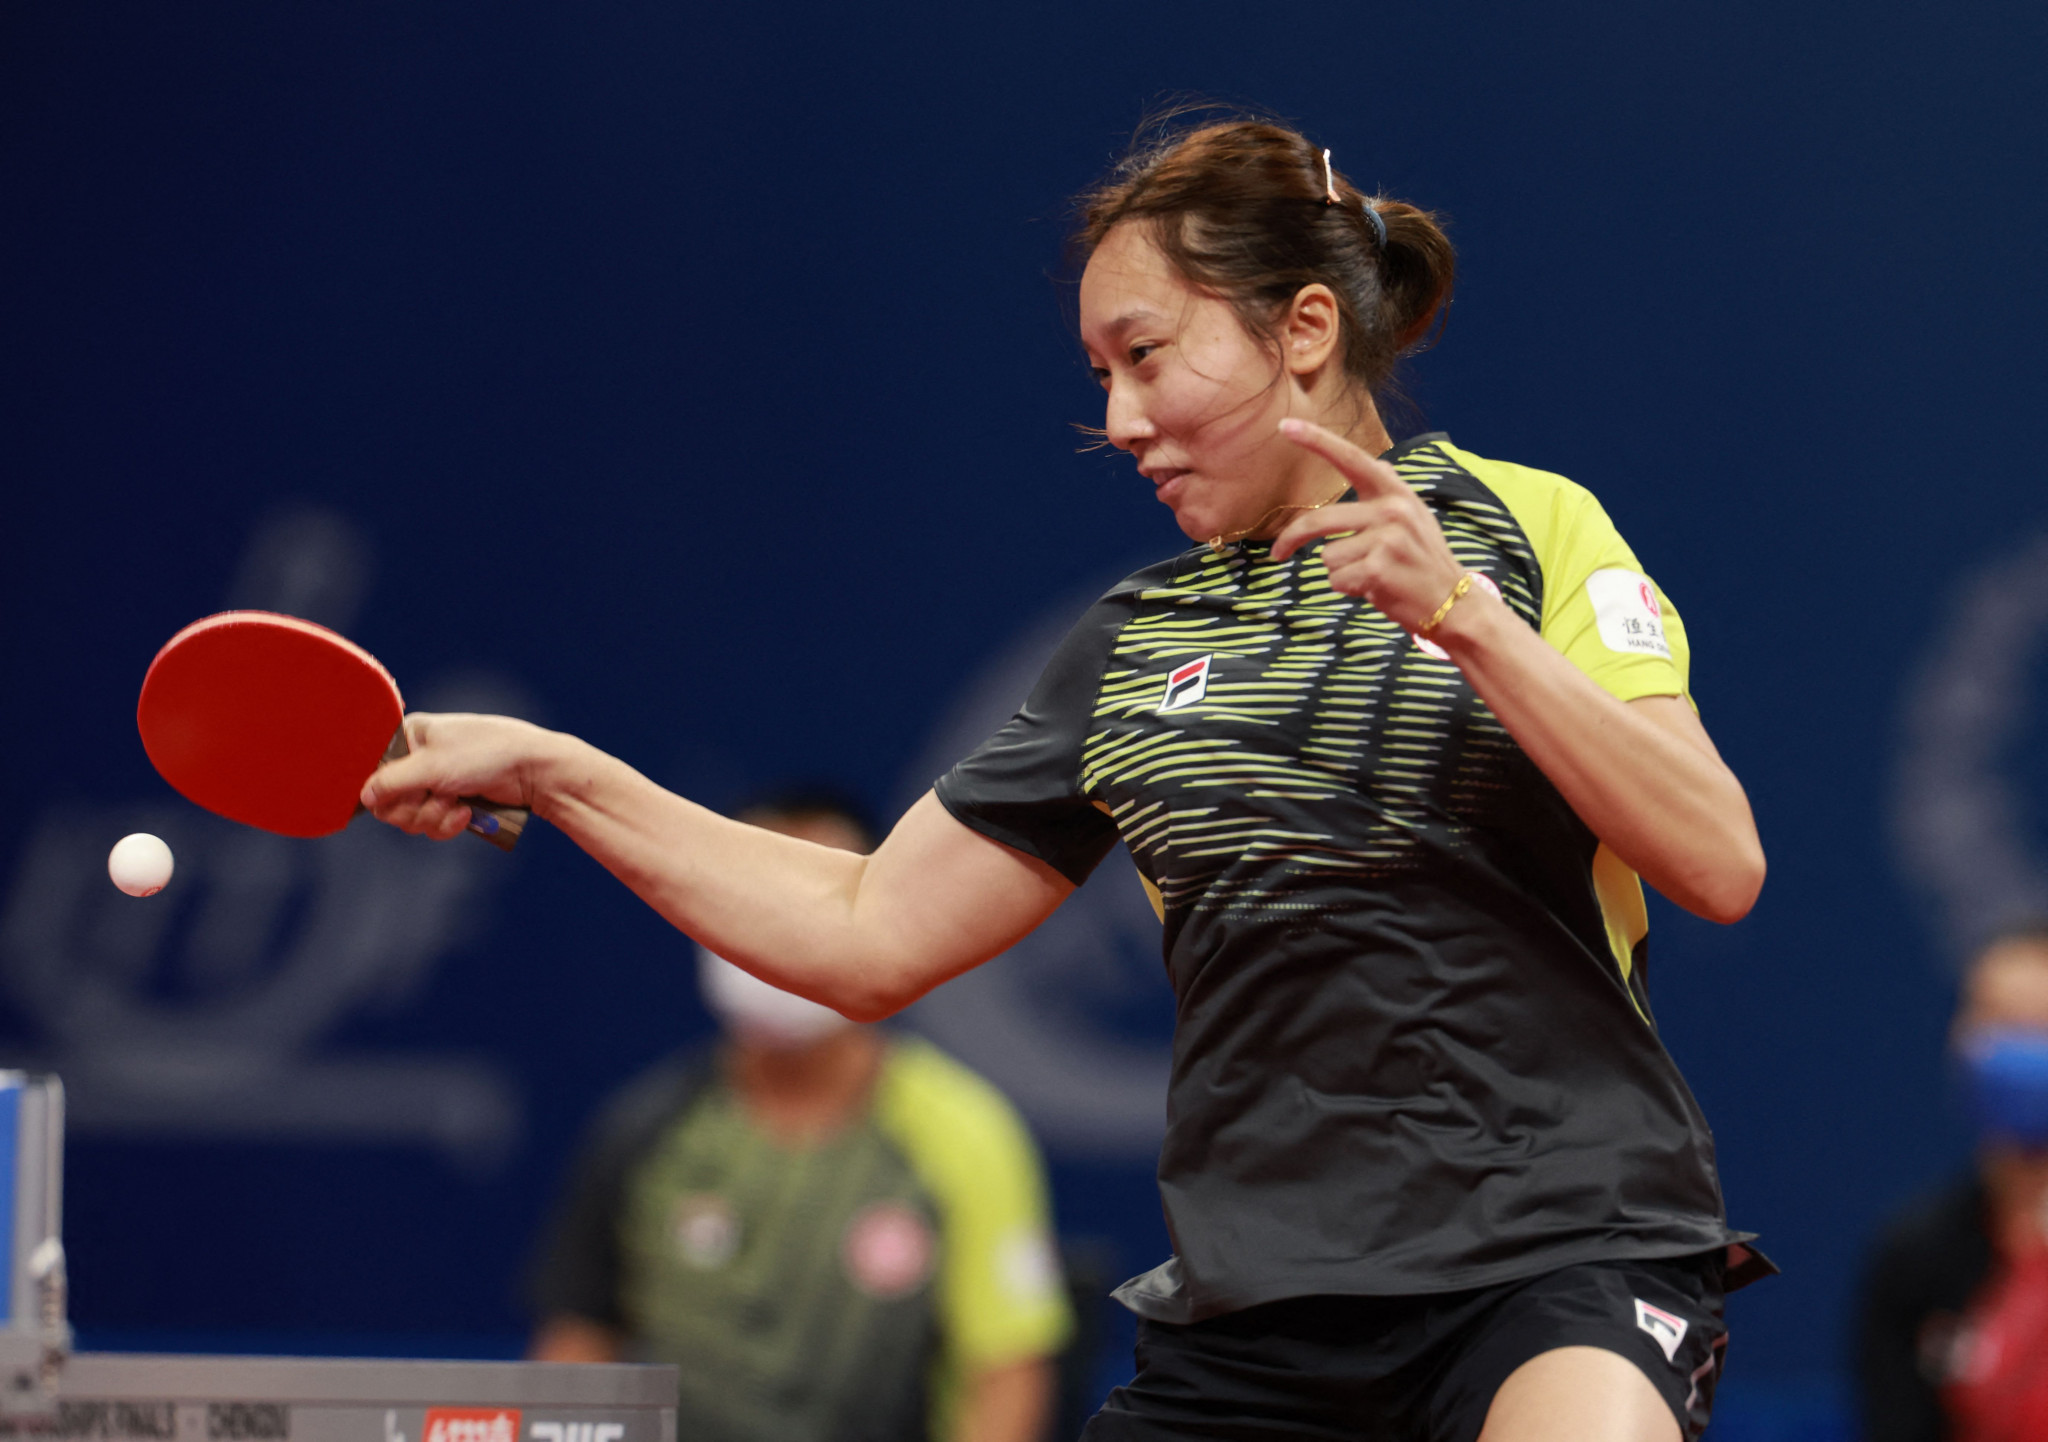 Olympic medallists Hong Kong suffer shock exit at ITTF World Team Table Tennis Championships